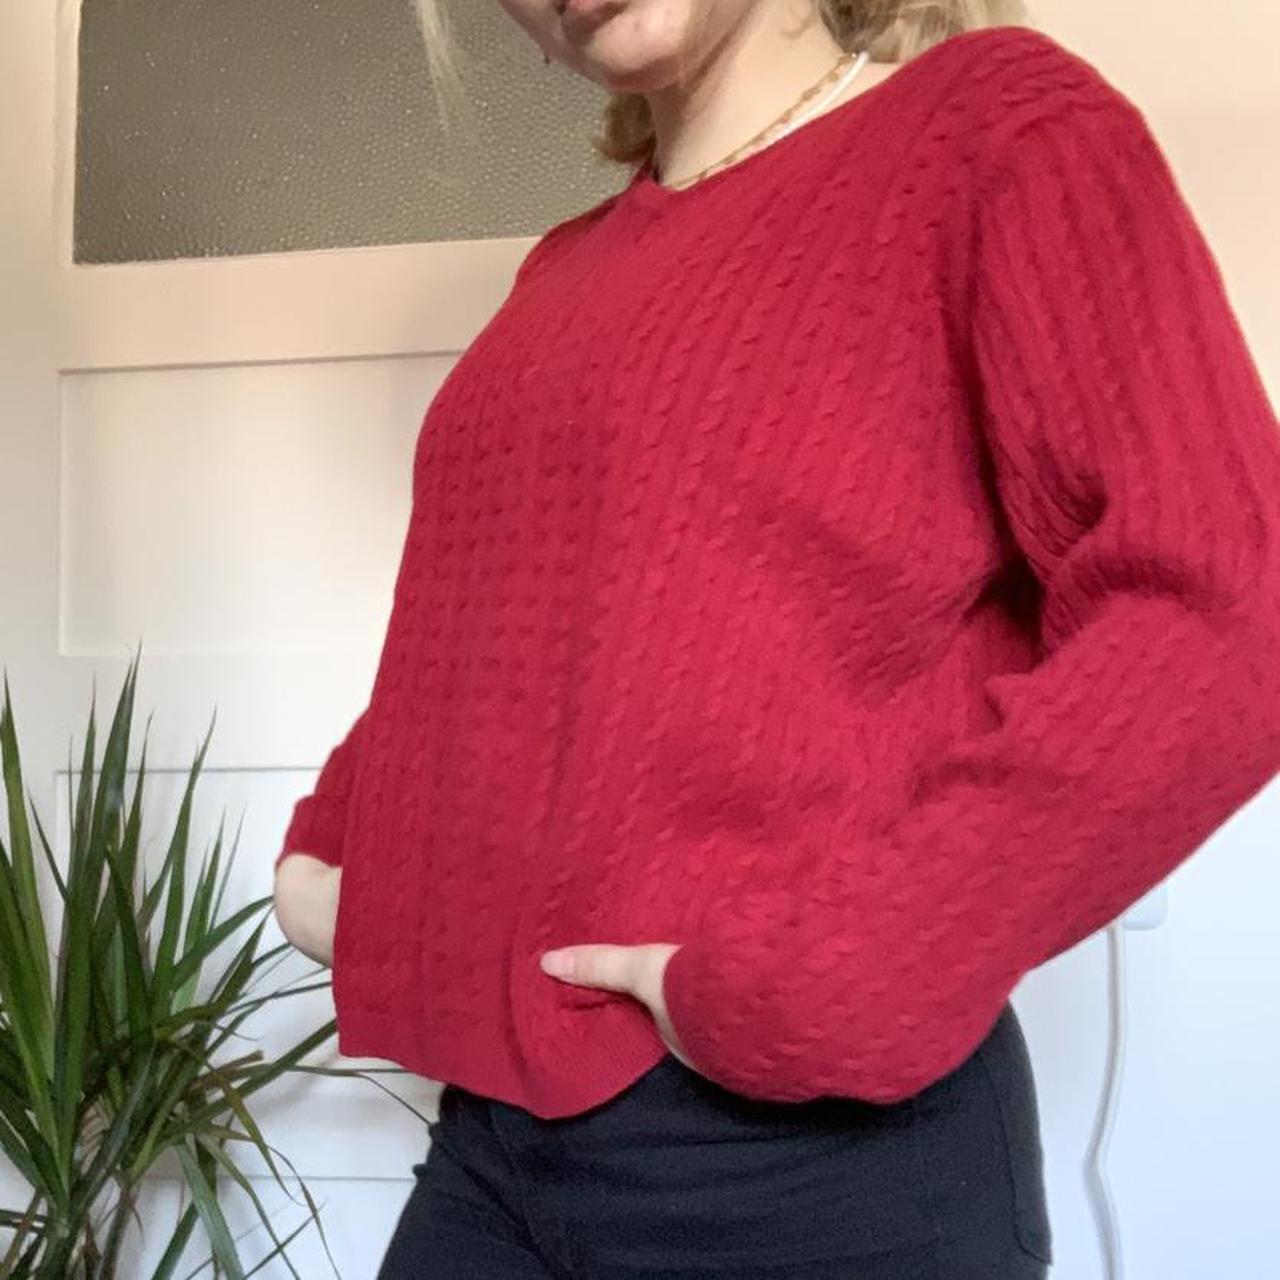 Product Image 2 - Roter Pullover (Farbe eher wie